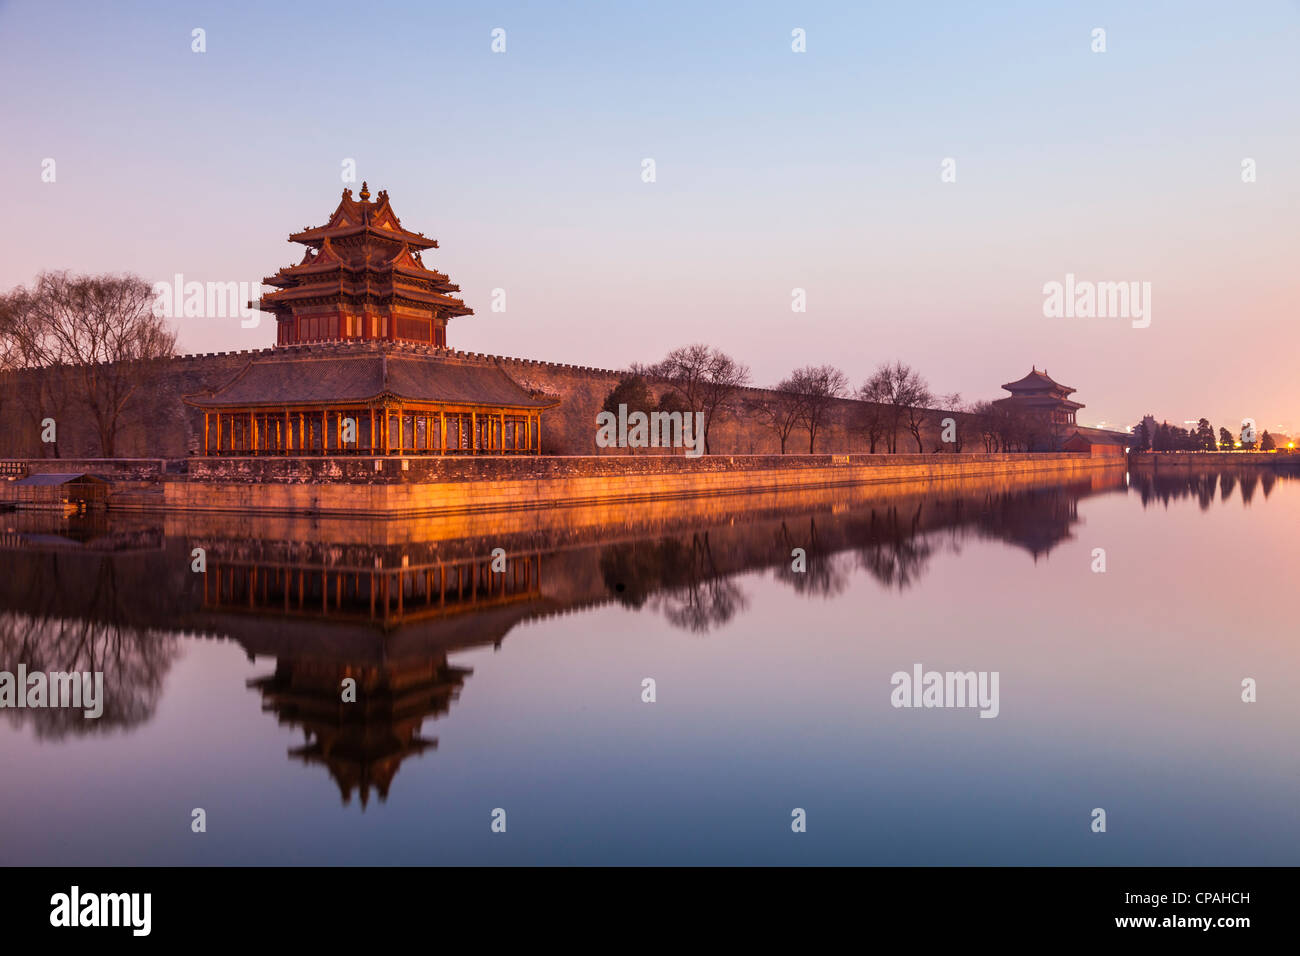 The wall and moat of the Forbidden City in Beijing, China, looking towards the North Gate after sunset. Stock Photo